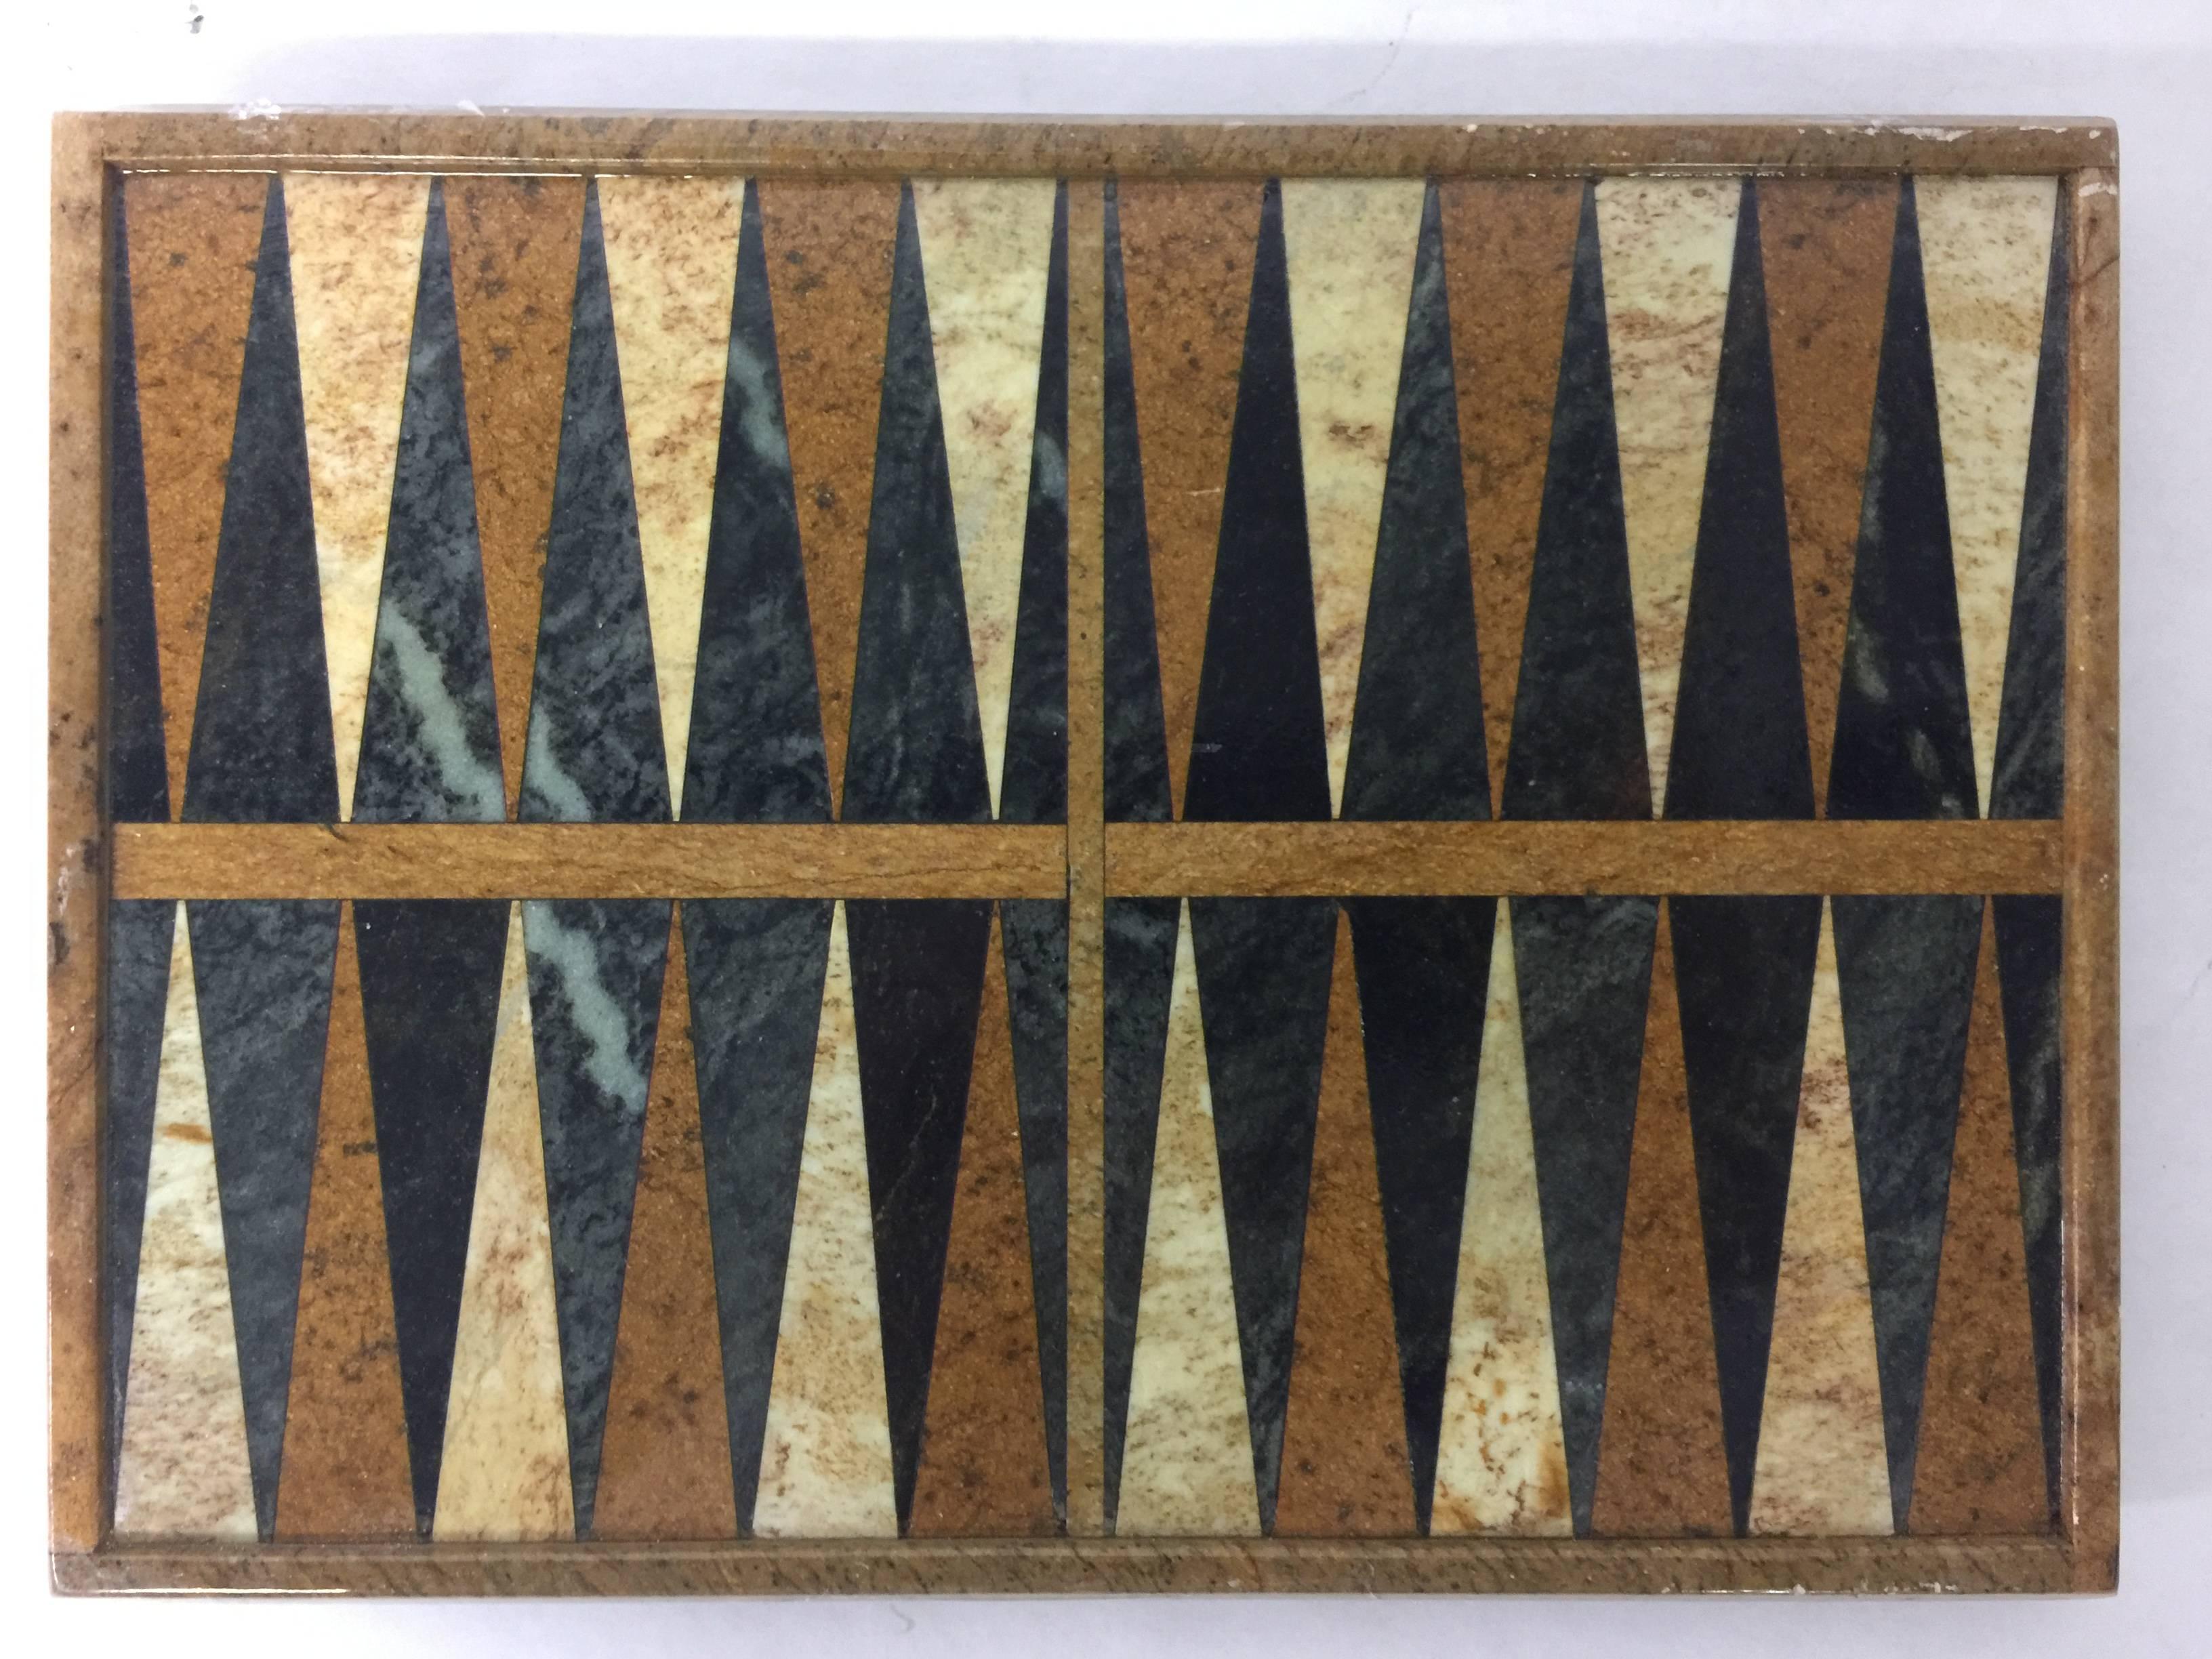 Game on. This vintage Brazilian backgammon board has a mix of different marbles. Gorgeous!